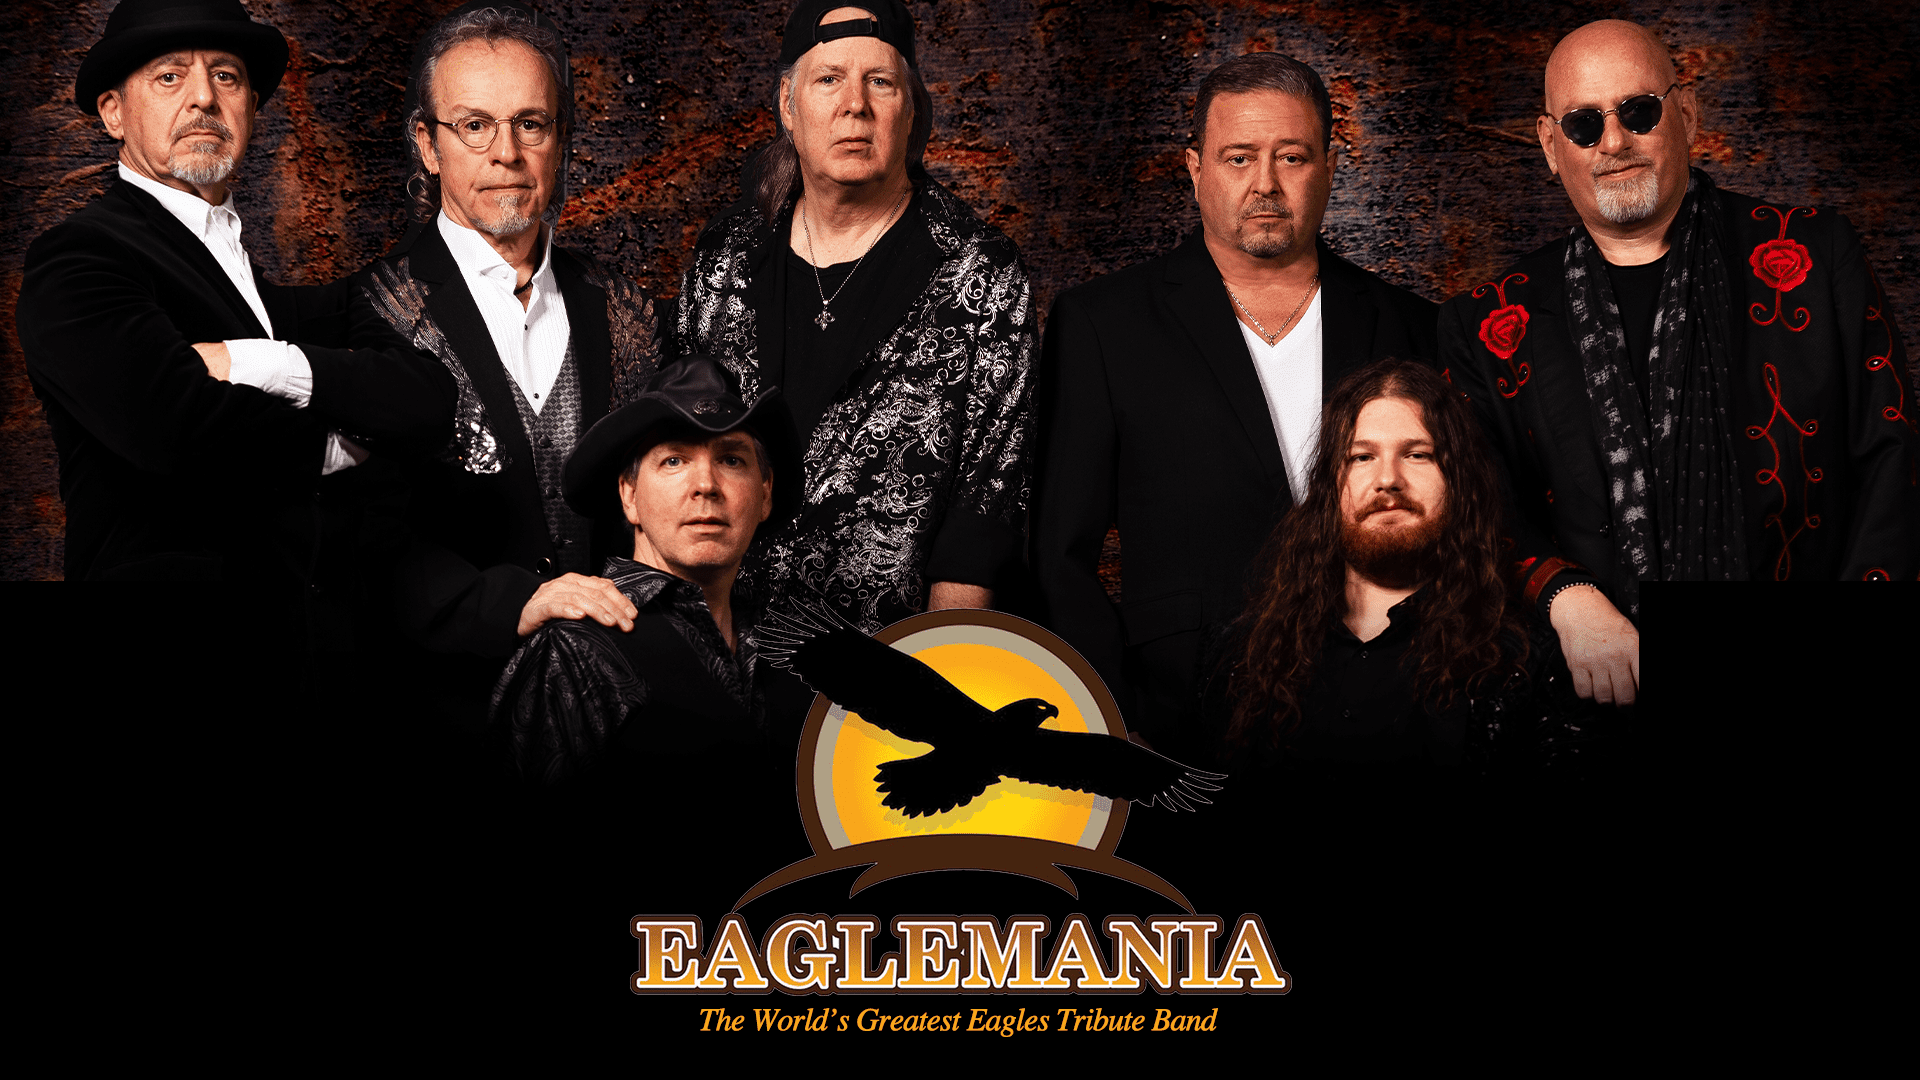 Eaglemania: The World's Greatest Eagles Tribute Band